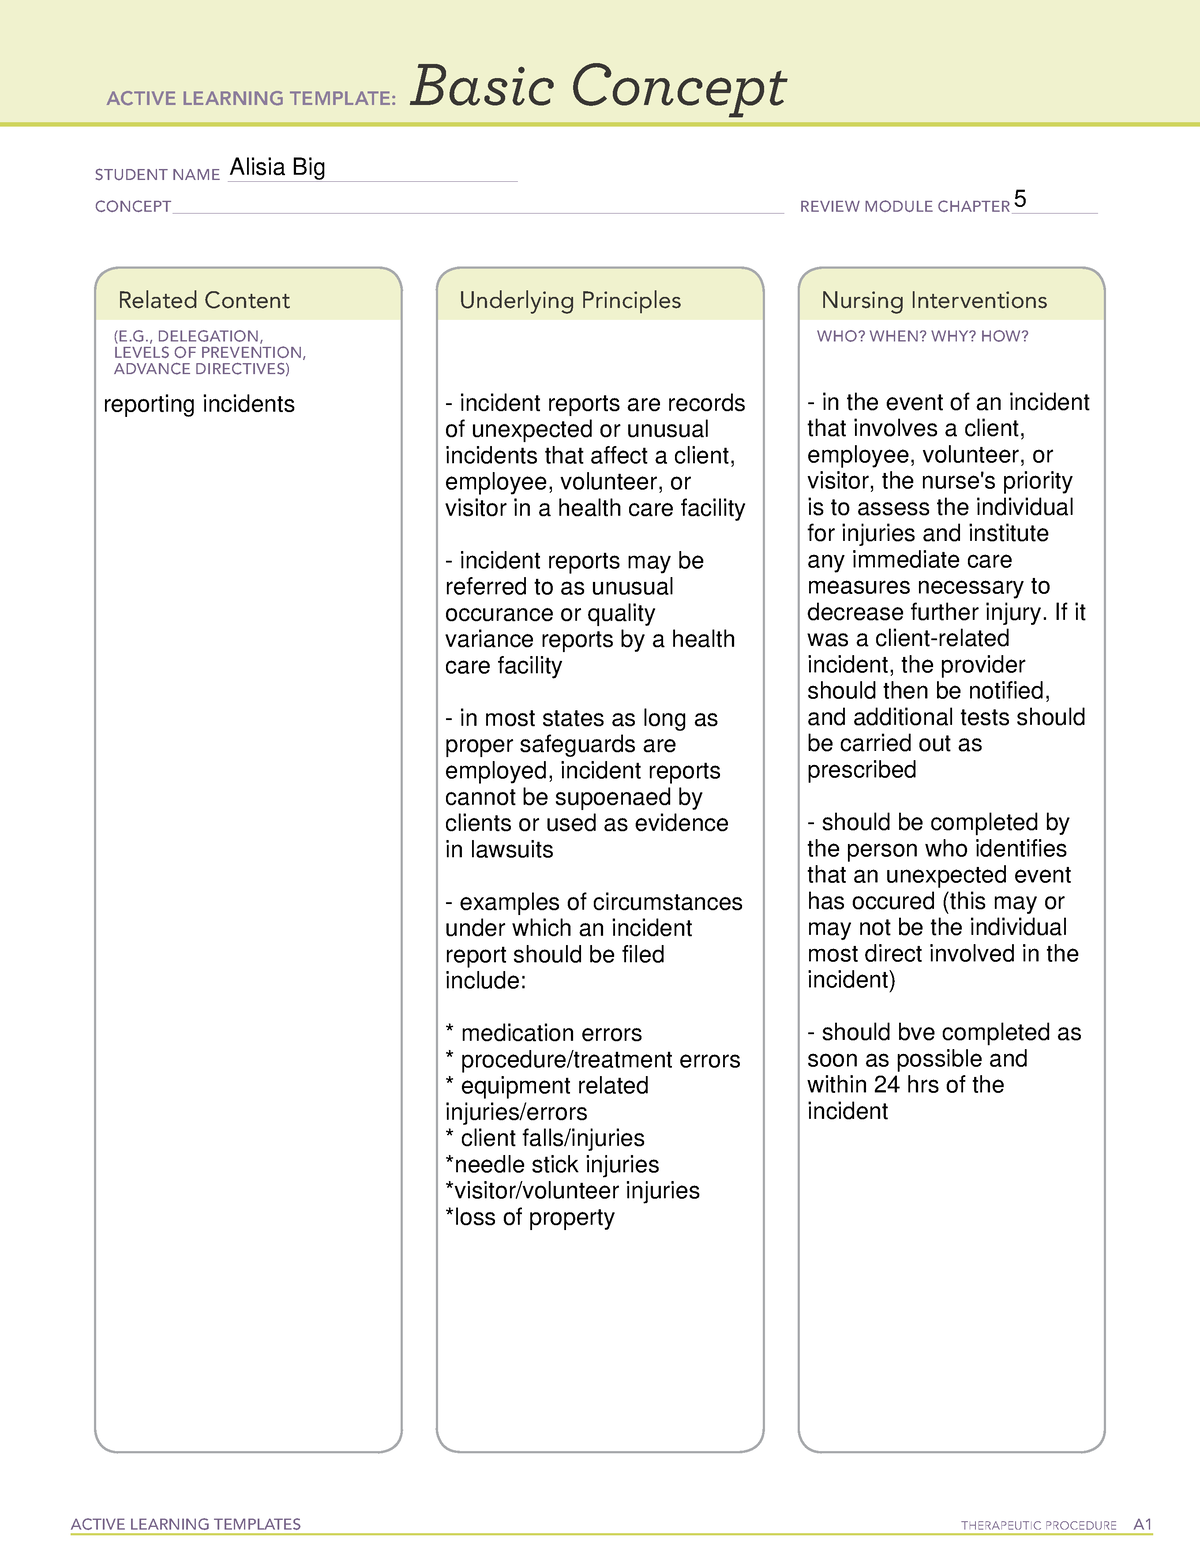 ATI Active Learning Templates